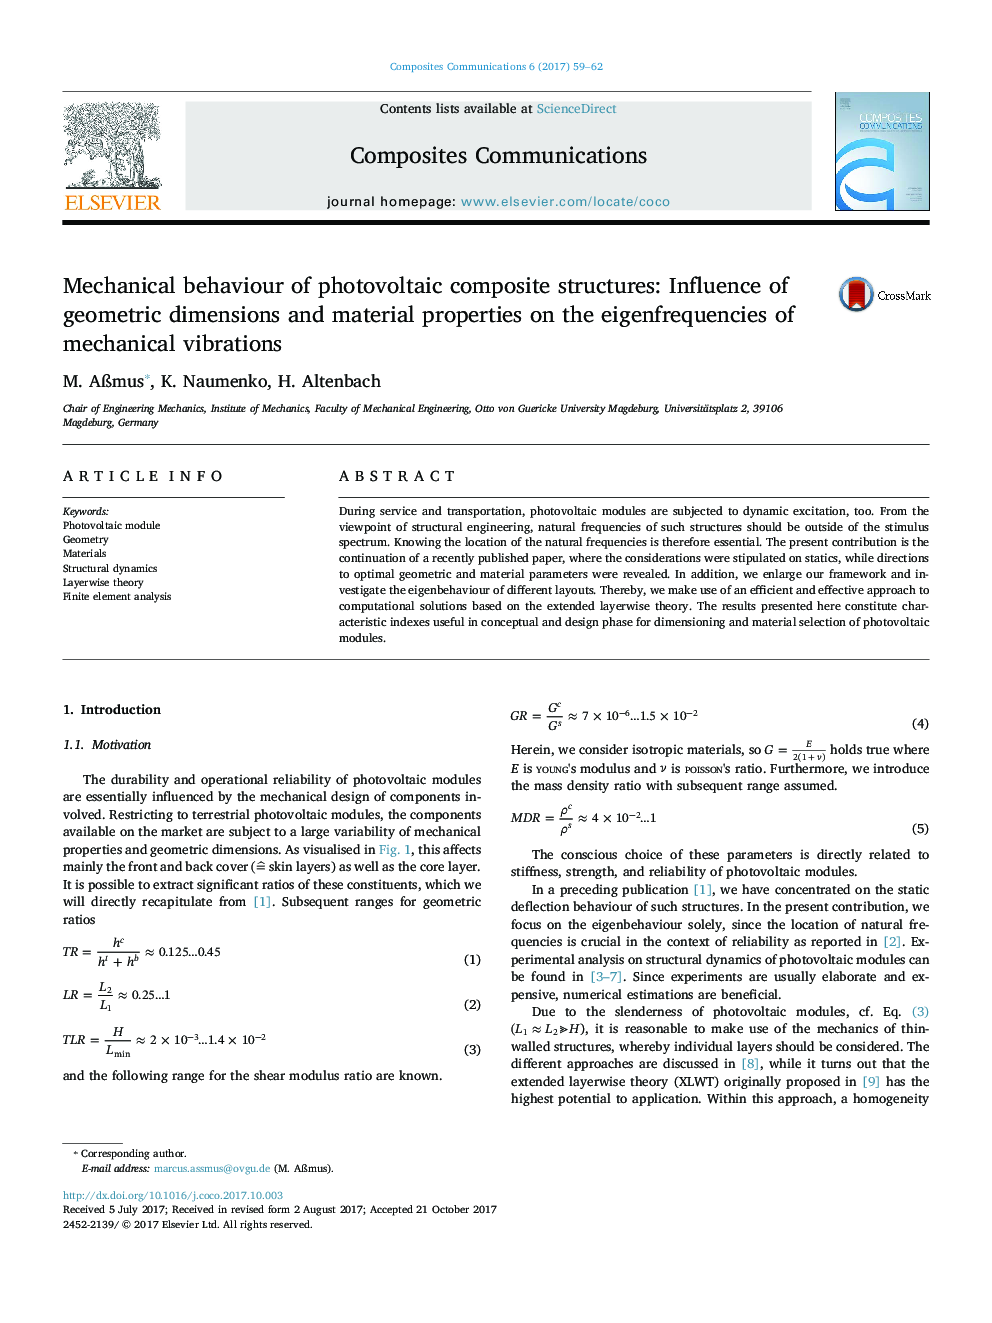 Mechanical behaviour of photovoltaic composite structures: Influence of geometric dimensions and material properties on the eigenfrequencies of mechanical vibrations